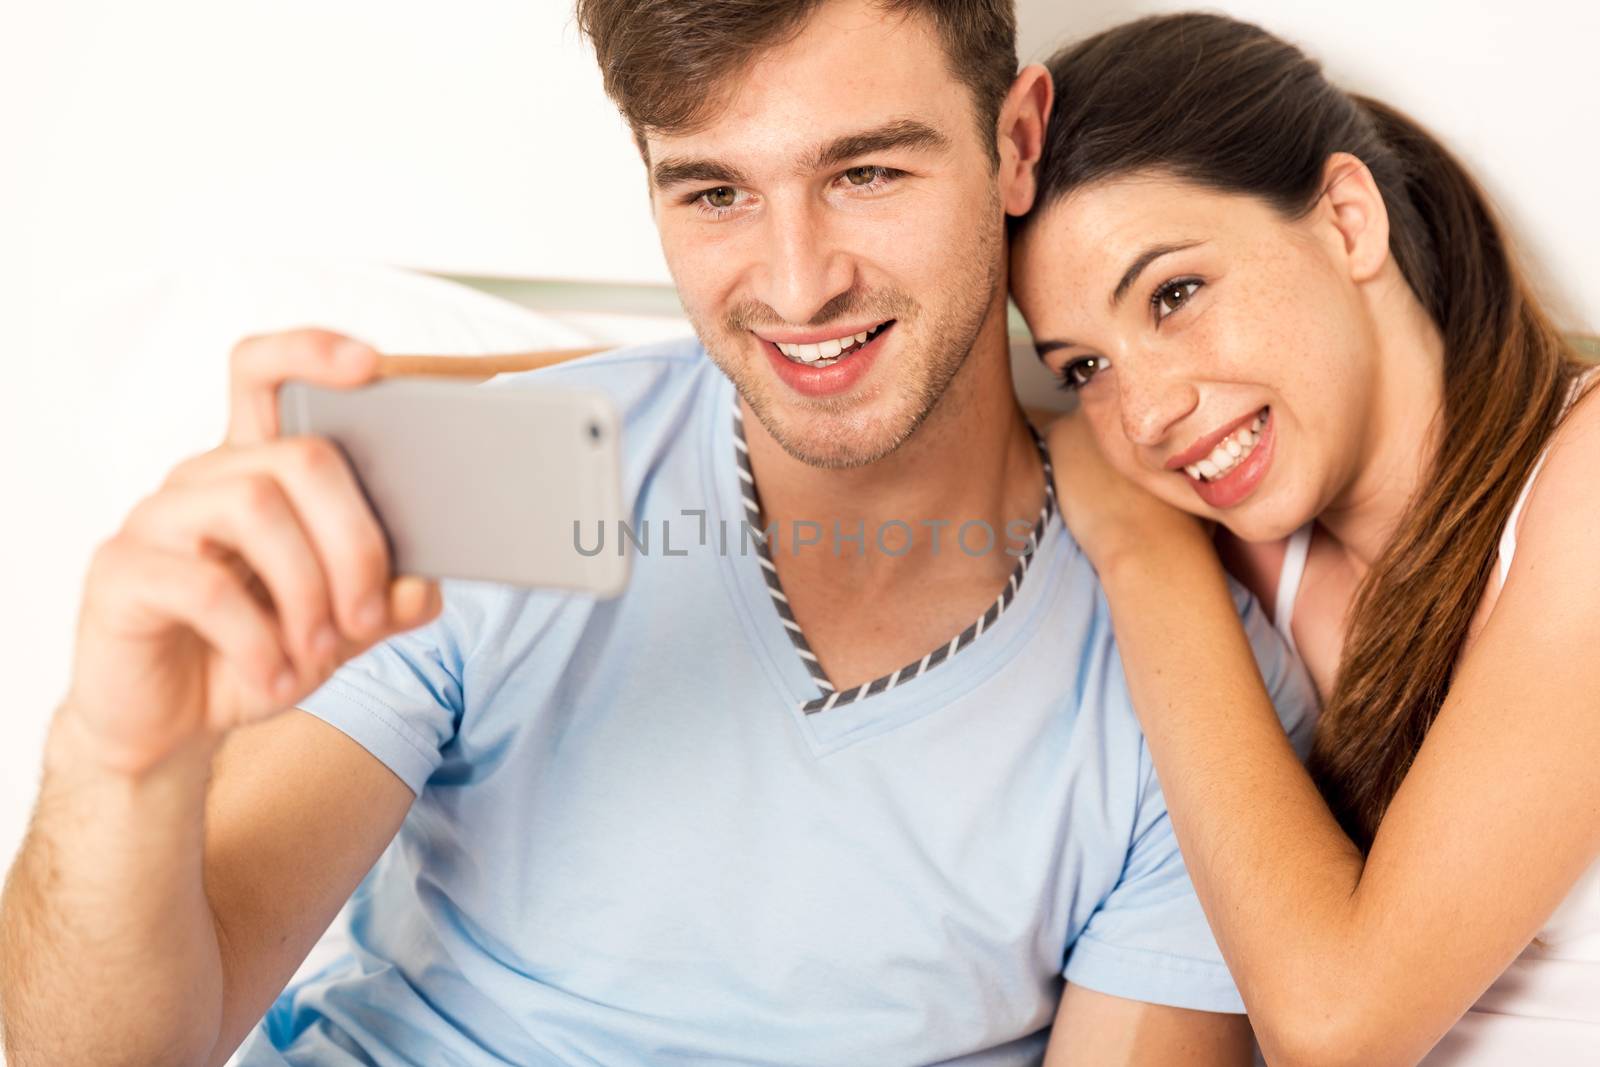 Young couple on bed watching videos on a cellphone